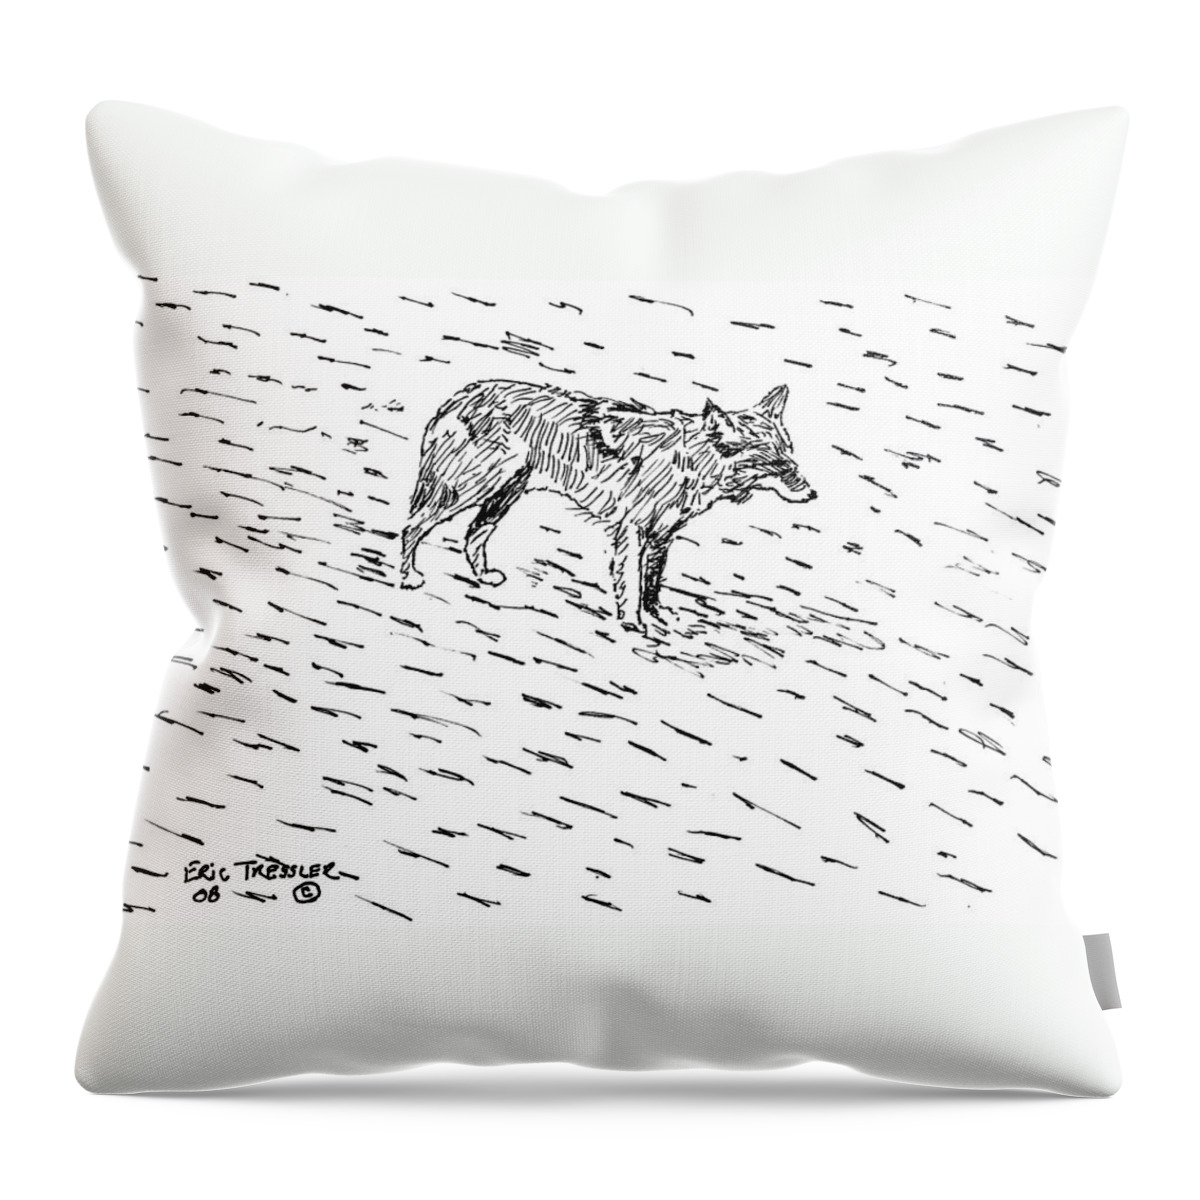 Coyote Throw Pillow featuring the photograph Coyote Pause by Eric Tressler